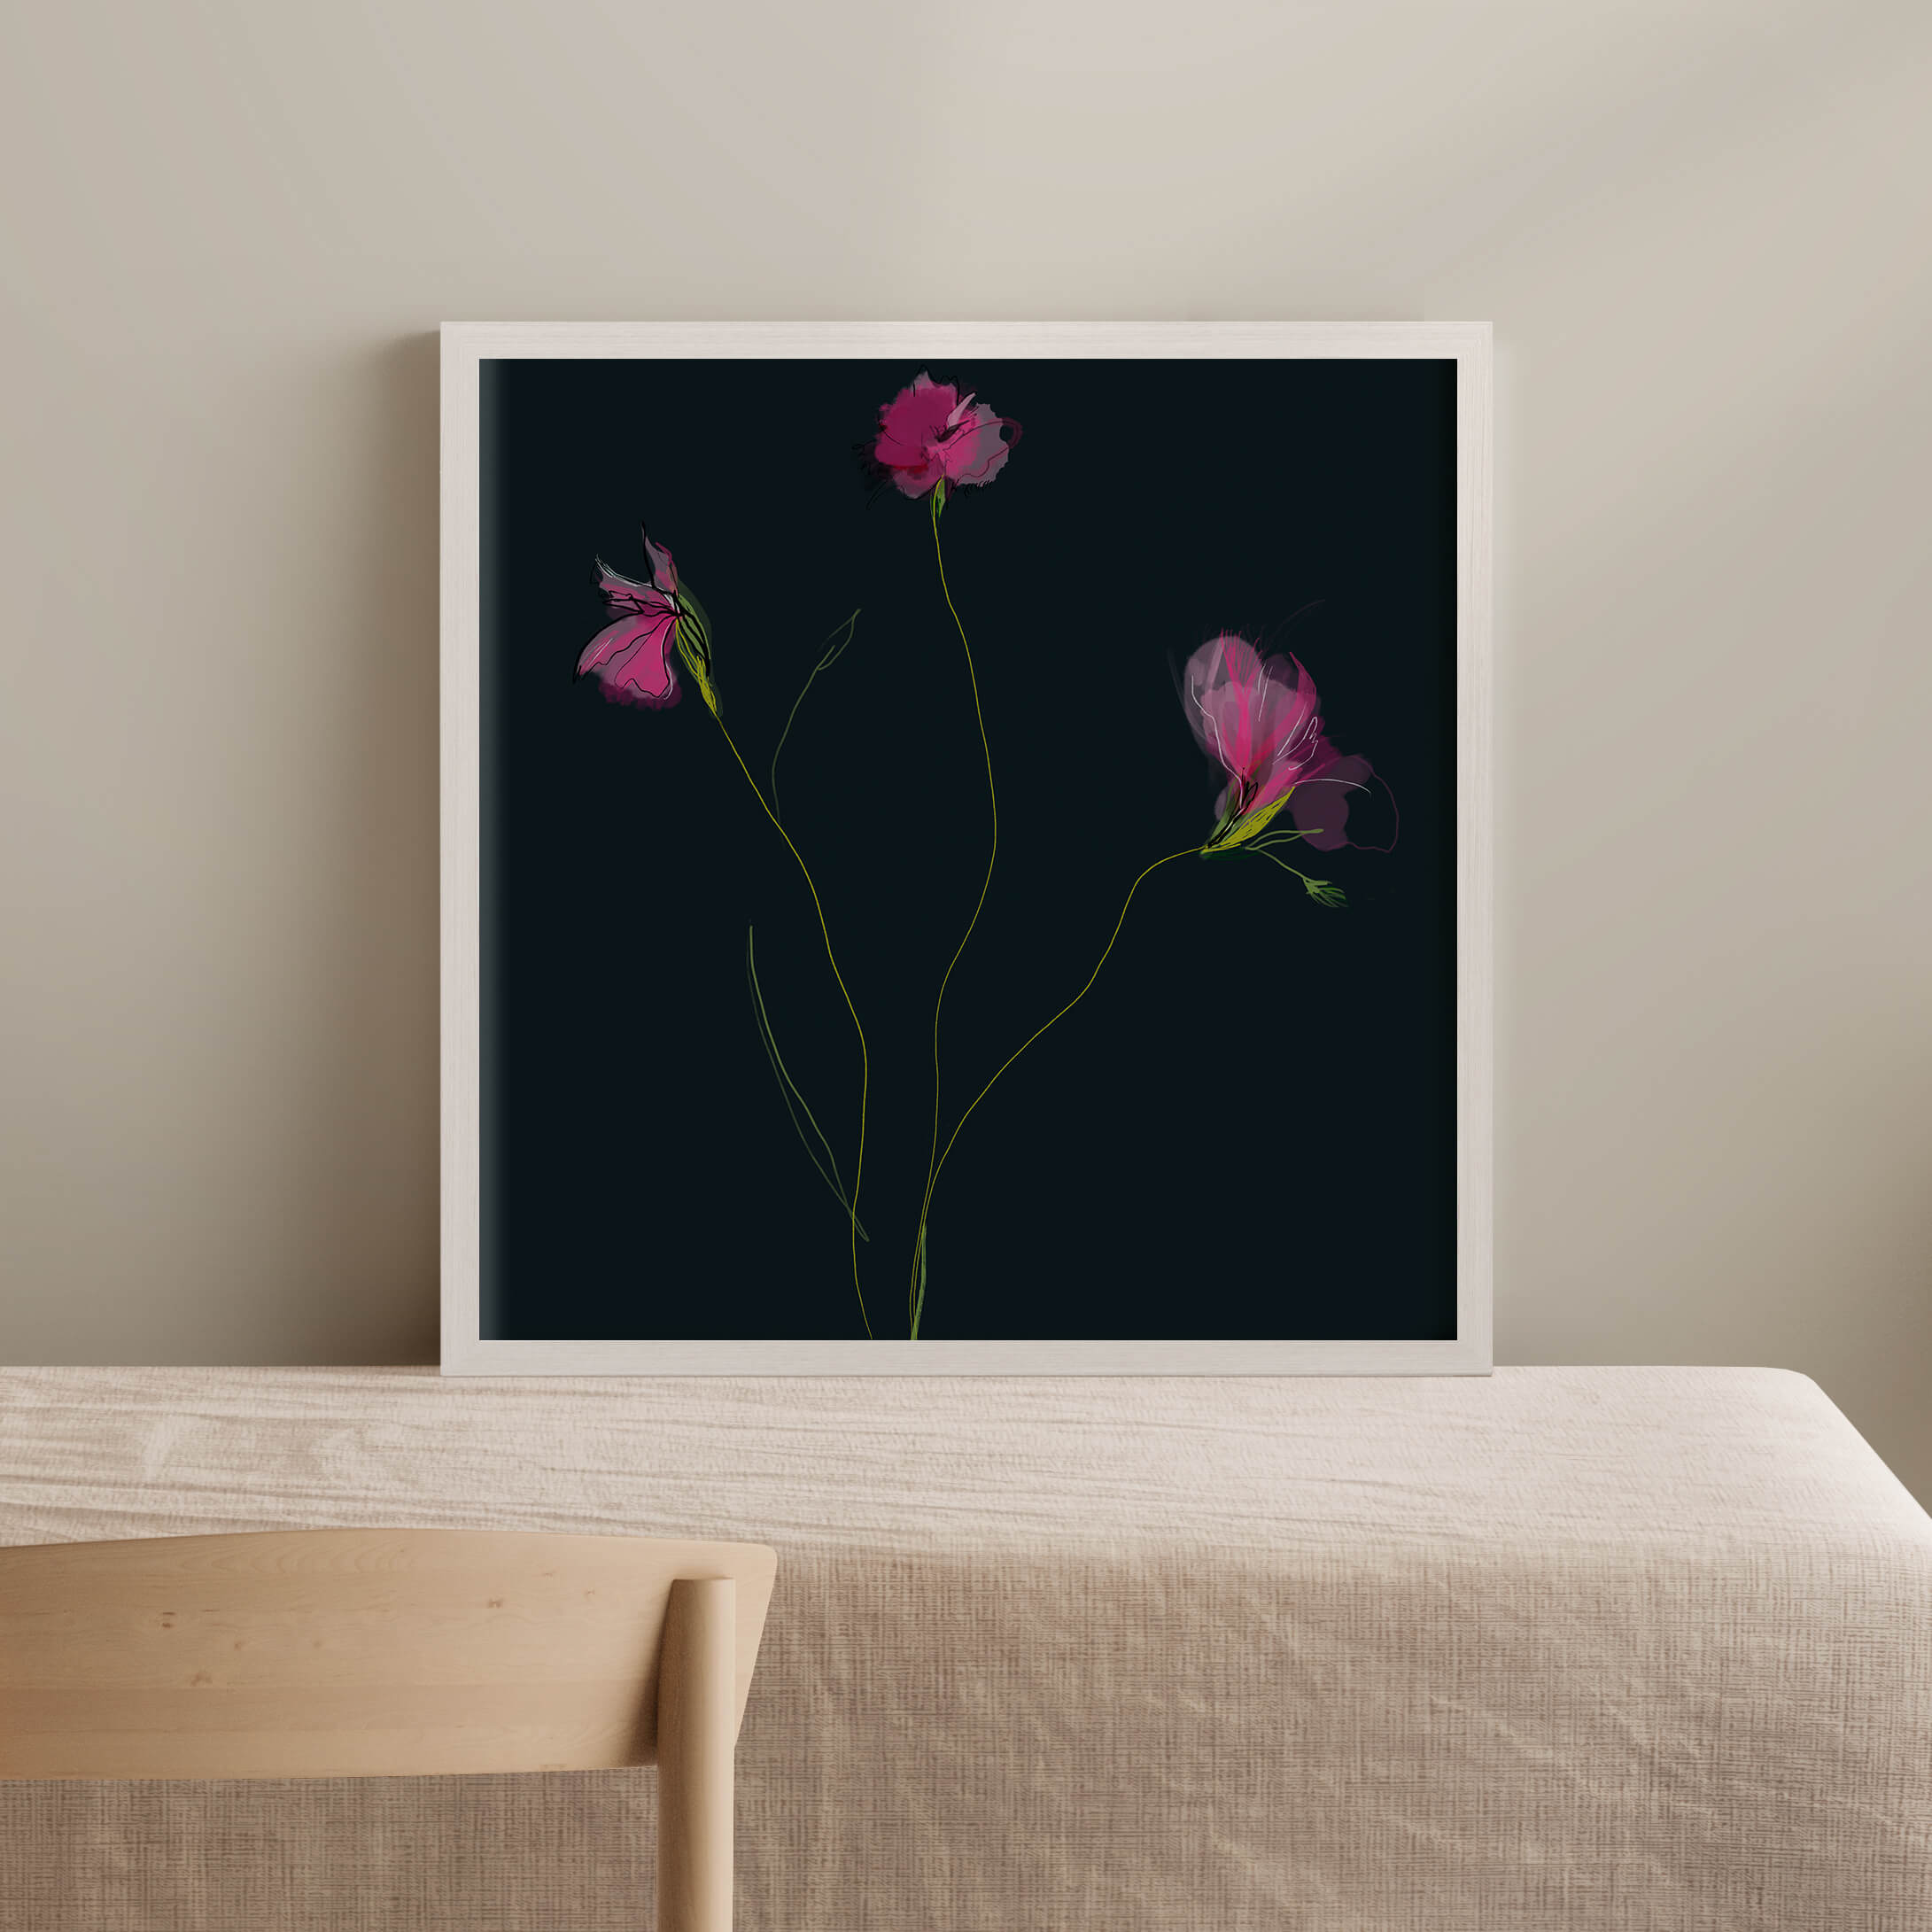 FLORA editions Art Prints & Cards for Flower Lovers by Catherine Toews - Giclée fine art print on archival paper